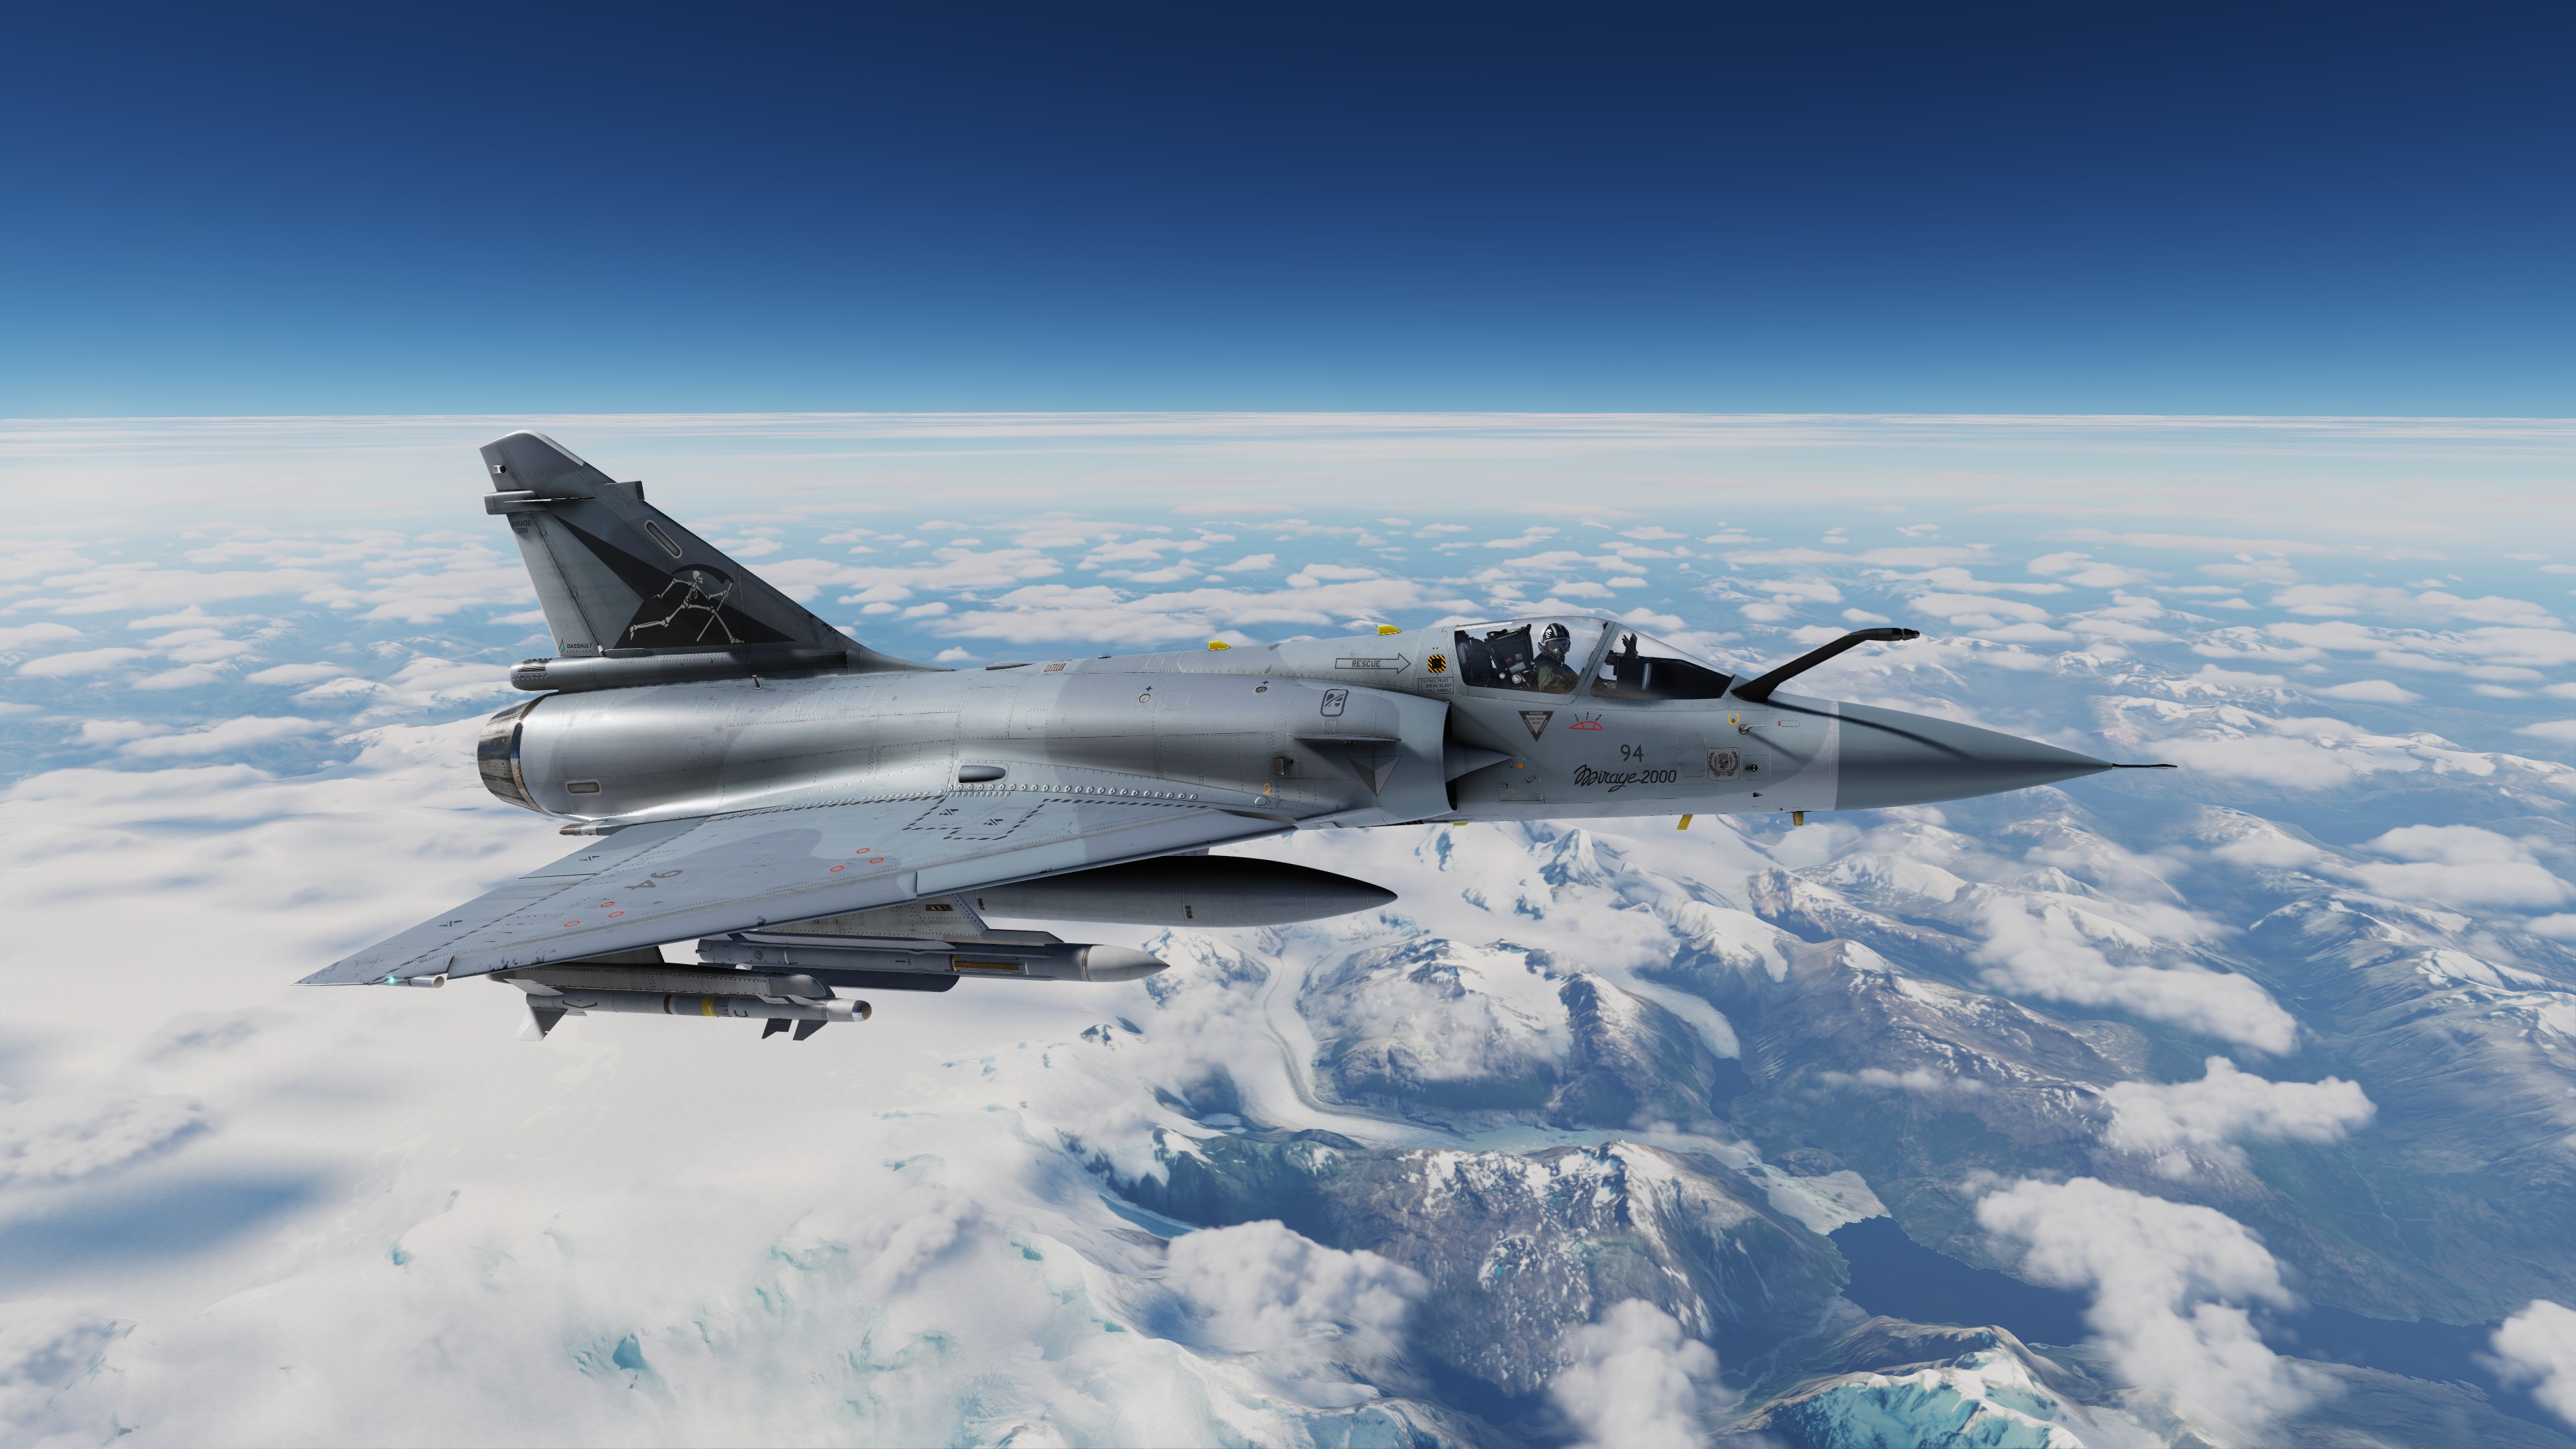 ACE COMBAT - M2000C - Nordennavic Royal Air Force - Sqn "Cote d'Or" V1.21 SPA94